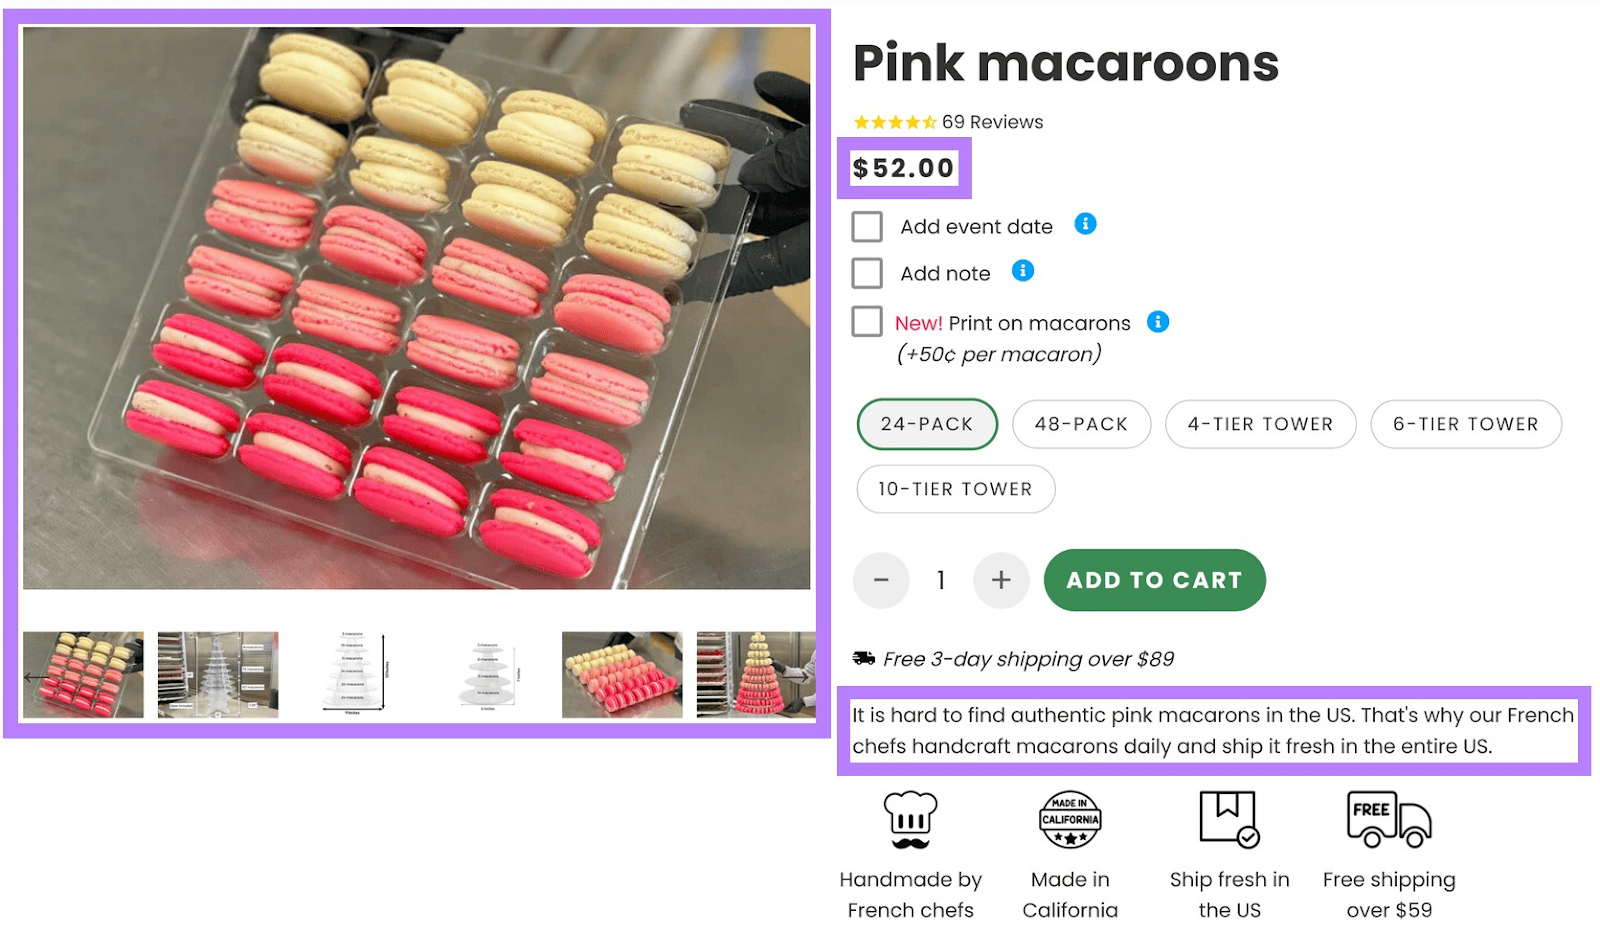 A product listing for "pink macaroons" with photos, description and price sectuons highlighted